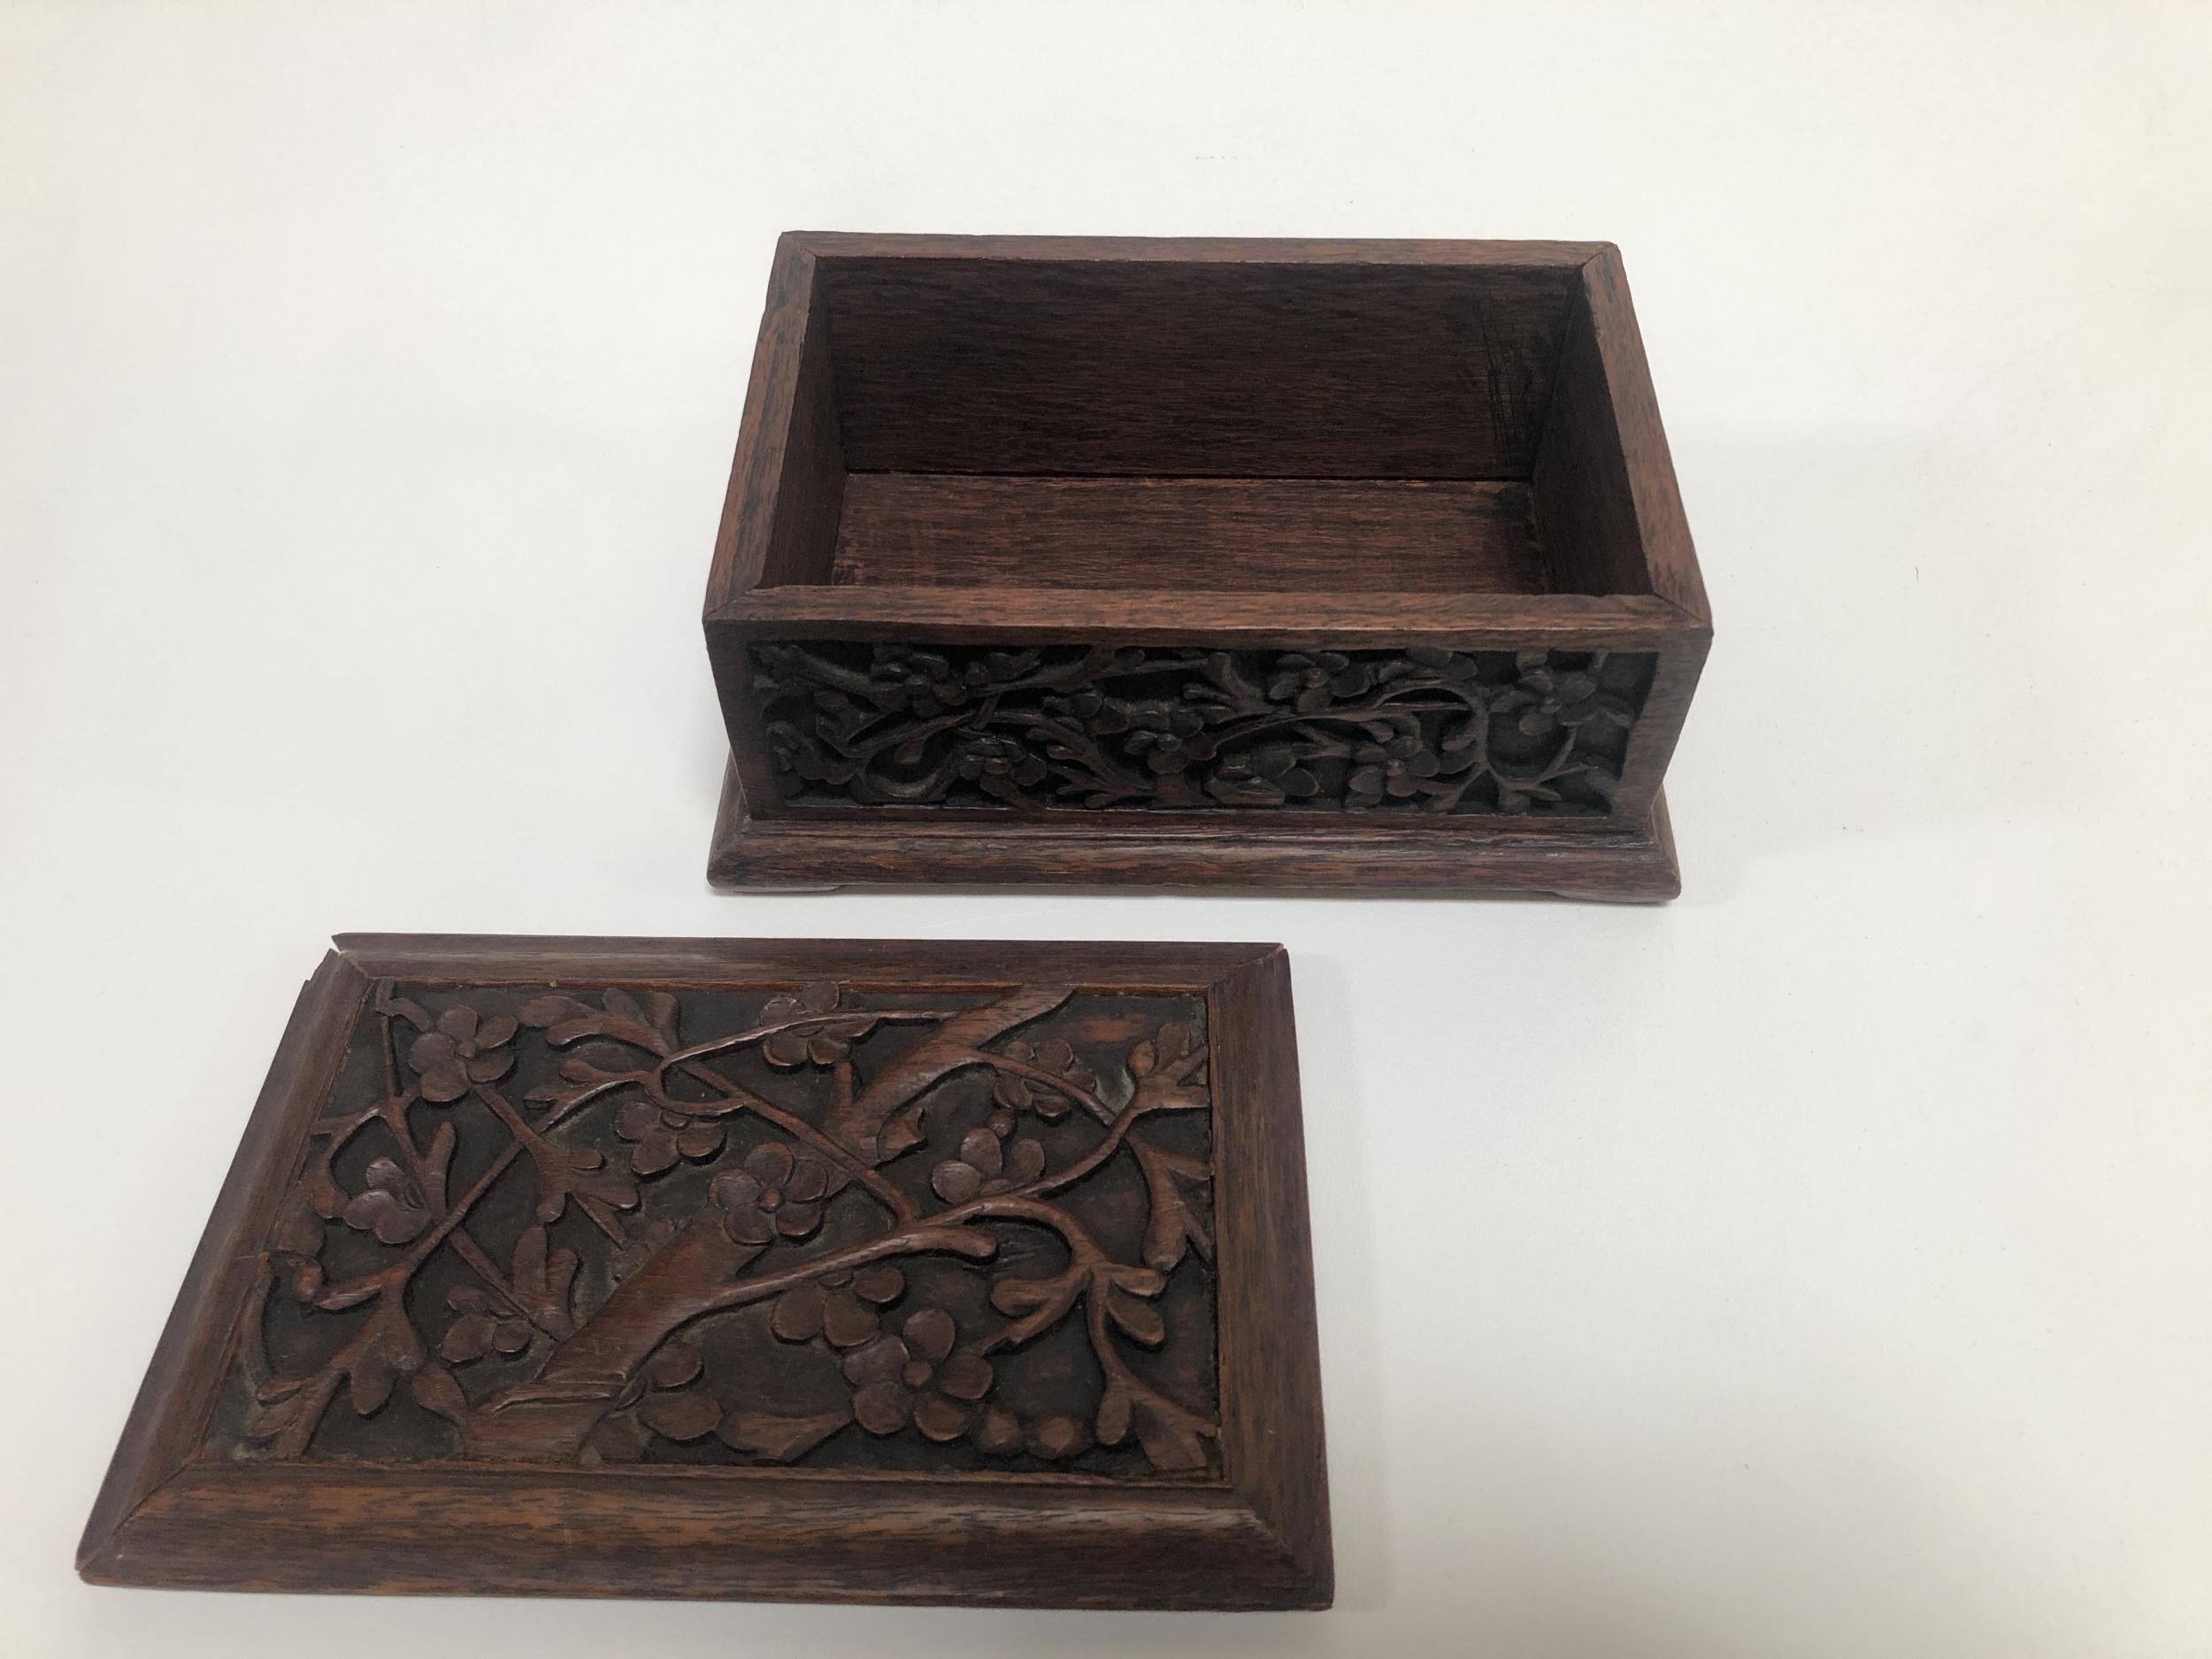 Early 20th Century Orantely Hand Carved Rosewood Jewelry/Keepsake Box